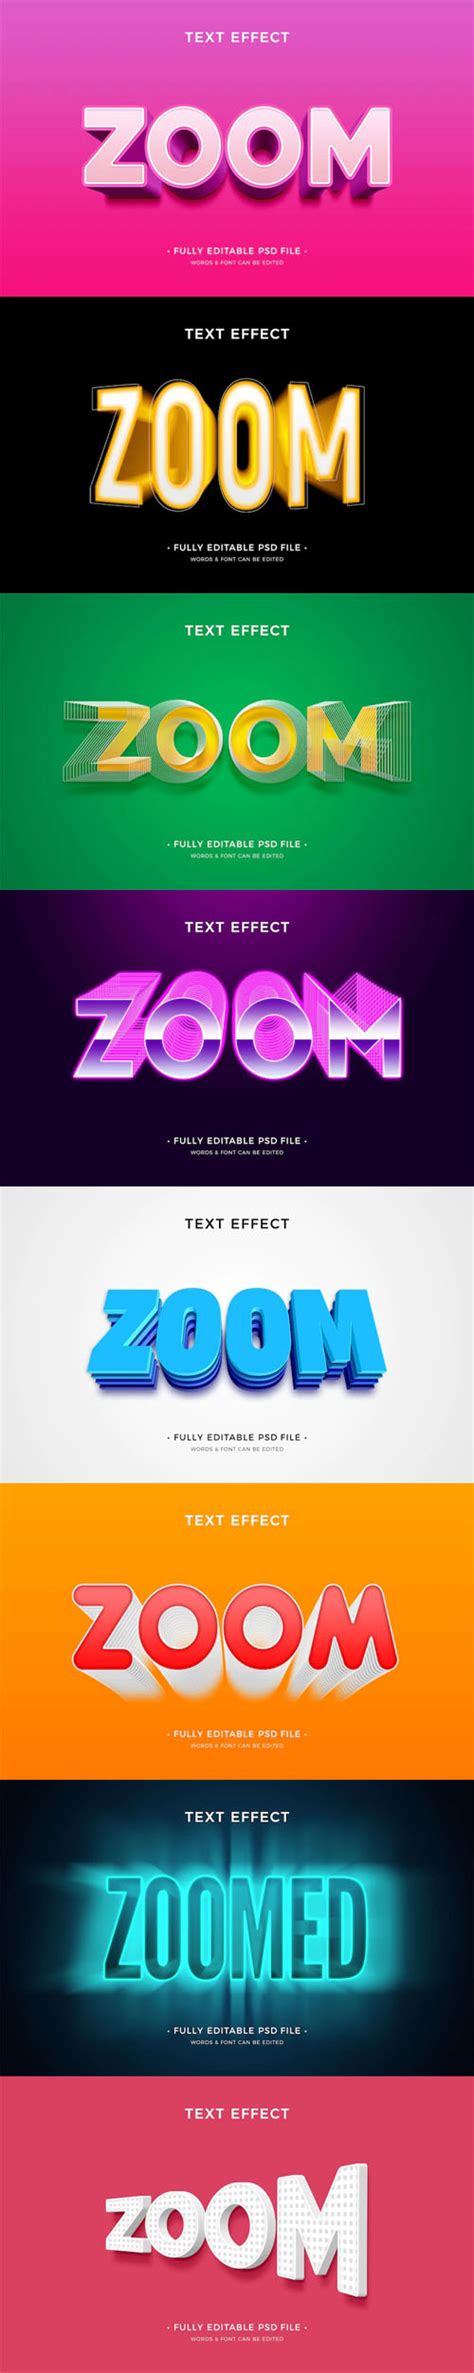 8 Zoom Text Effects Templates For Photoshop Best Files